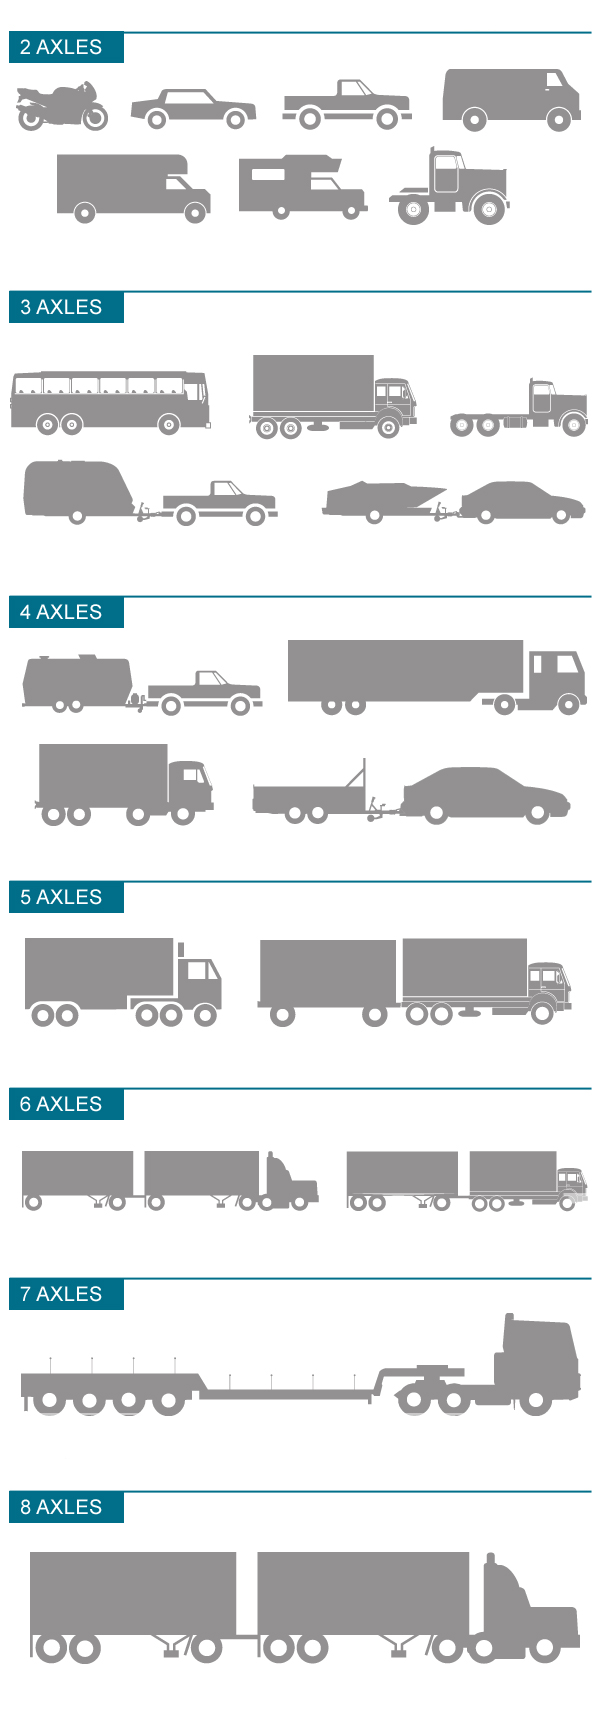 How many axles on your vehicle